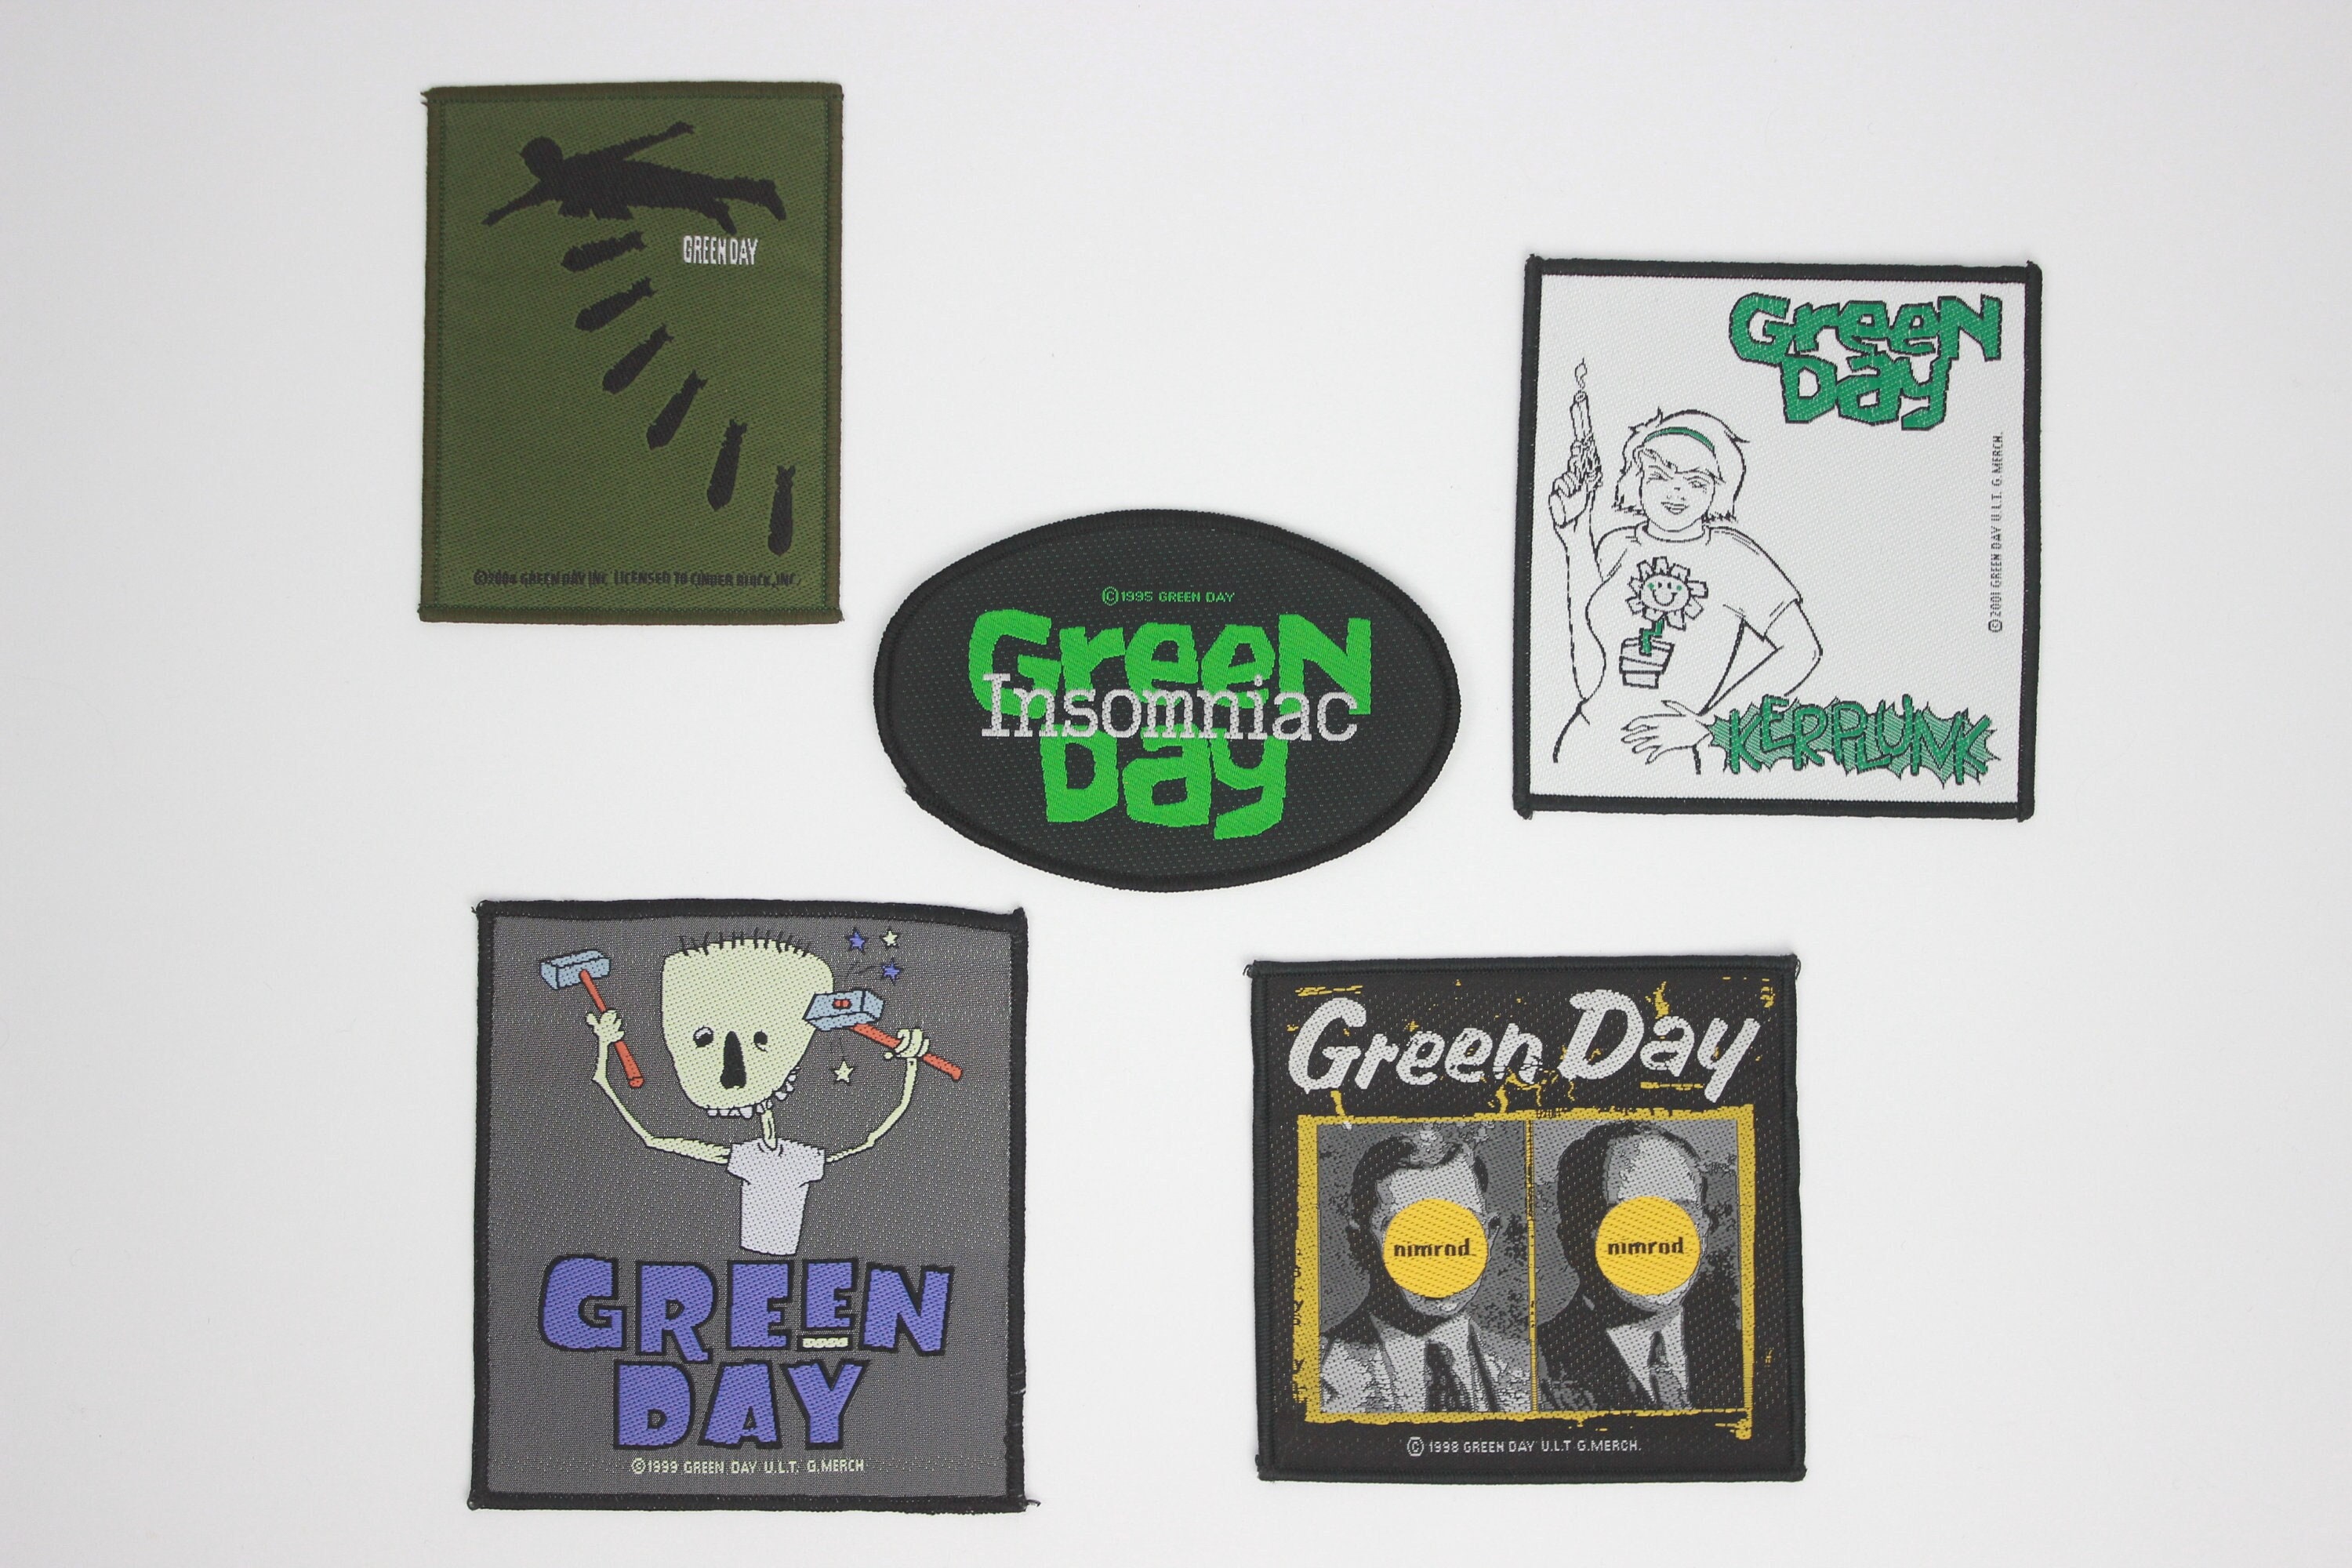 Punk Patches Collection Stock Illustration - Download Image Now - Heavy  Metal, 1990-1999, Rock Music - iStock